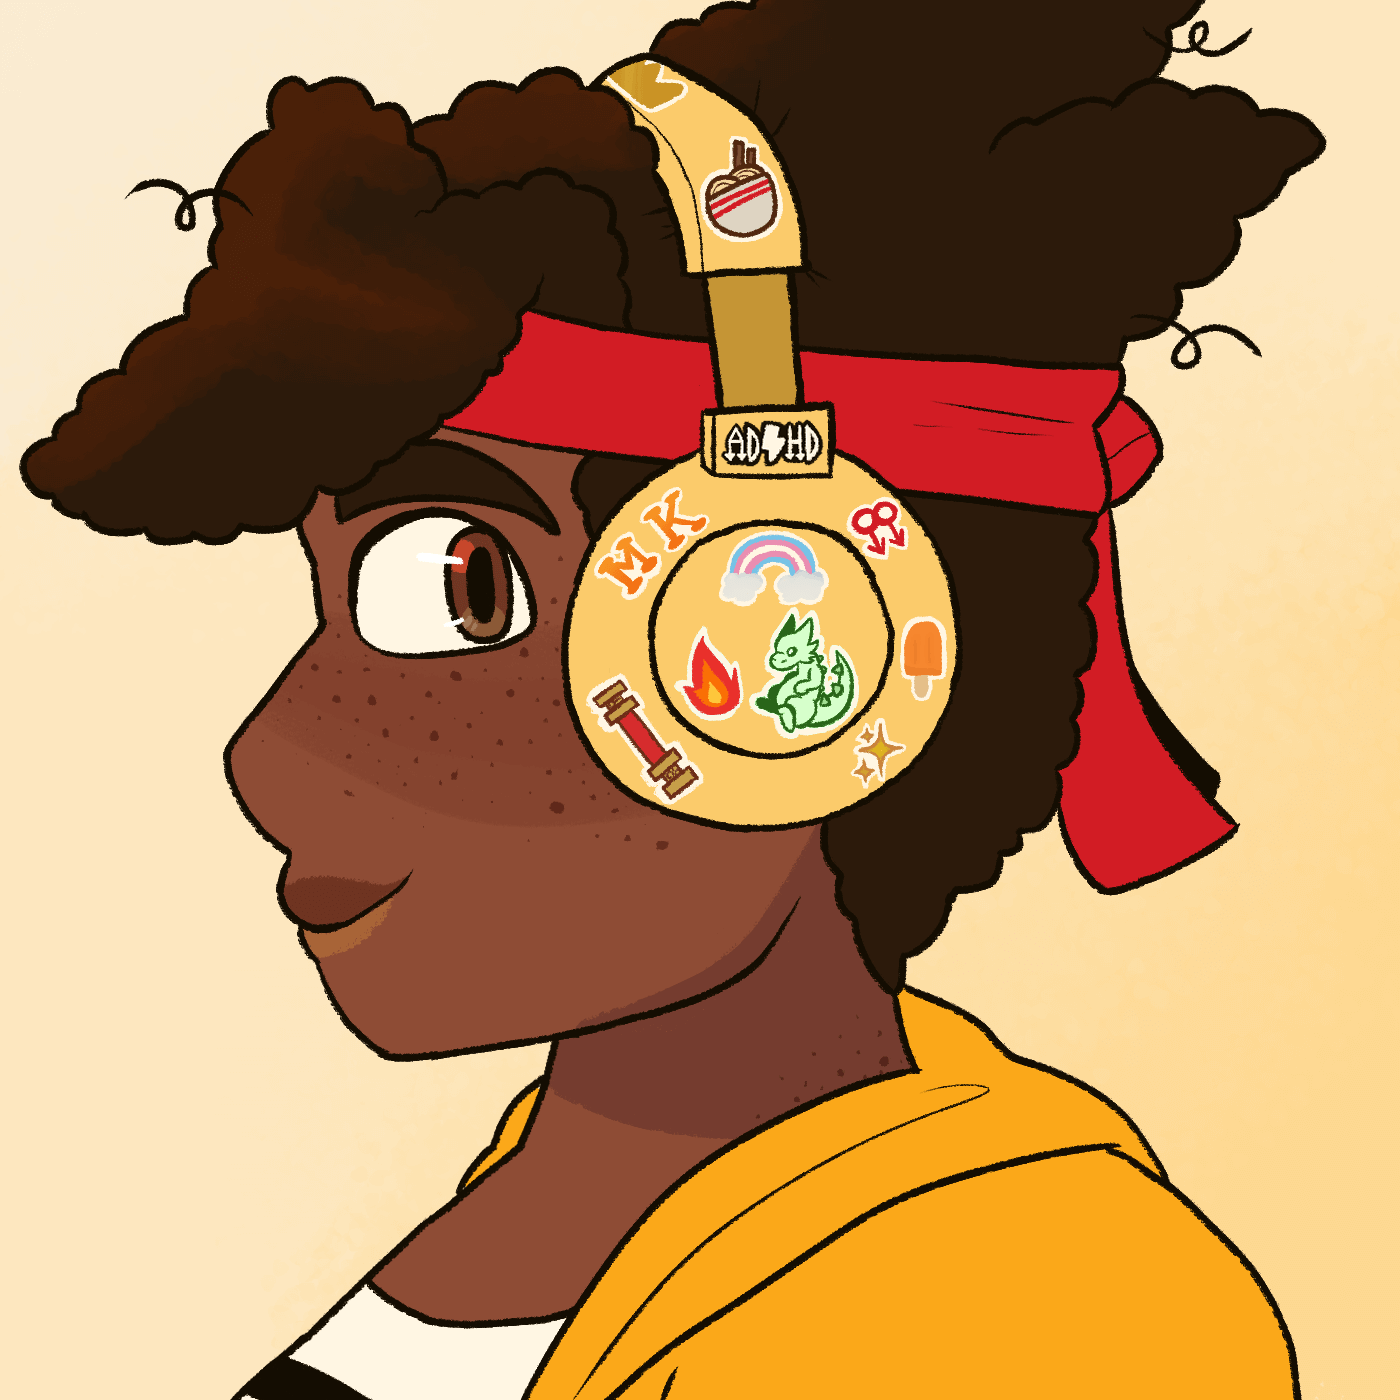 Fanart of MK wearing yellow headphones. It's a side view, and he's grinning at the viewer. His headphones have a number of stickers on it, including ones of a crown sticker near the top, a bowl of noodles, 'ADHD' in the style of ACDC's logo, a double mars symbol, a trans flag in a rainbow shape, an M and K sticker right next to each other, and a sticker of the golden staff. In the middle of the visible ear cover to our side, there is a sticker of a flame, and a green dragon.